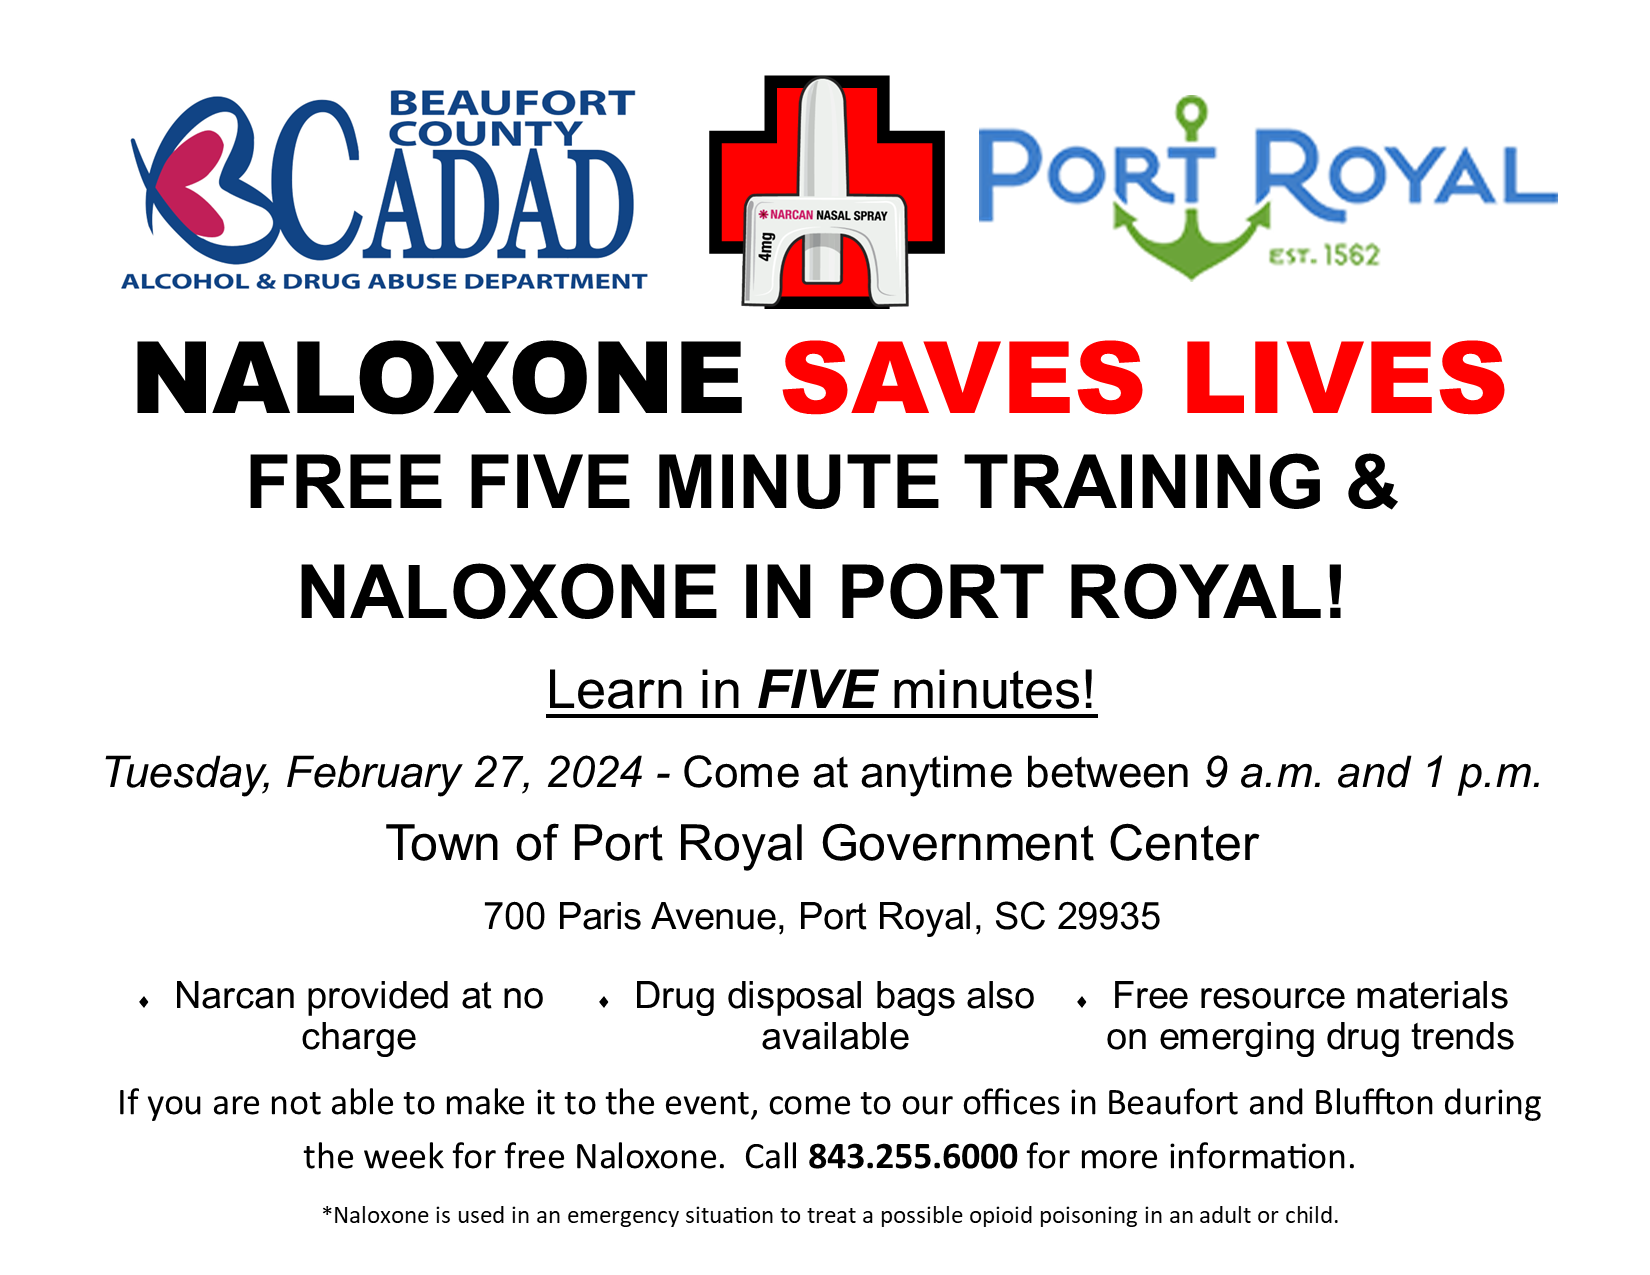 Free Naloxone and Training to be Held at Port Royal Government Center Tuesday, February 27